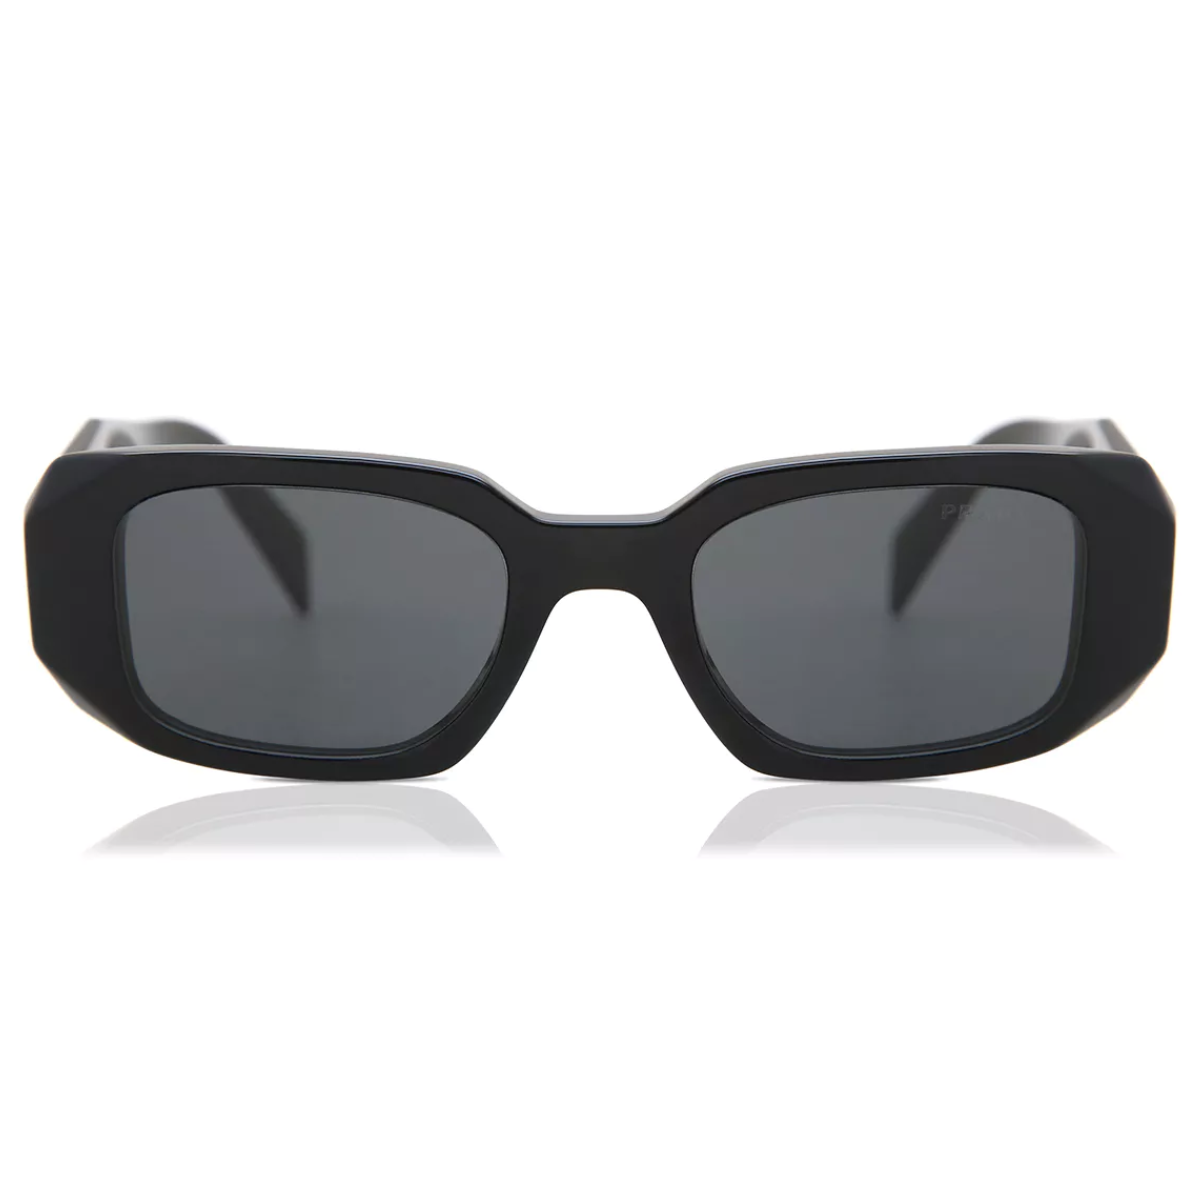 "Discover the latest Prada SPR 17WS 1AB5S0 sunglasses at Optorium, featuring a stylish rectangular design and shiny black frame, ideal for adding a touch of sophistication to any summer ensemble."